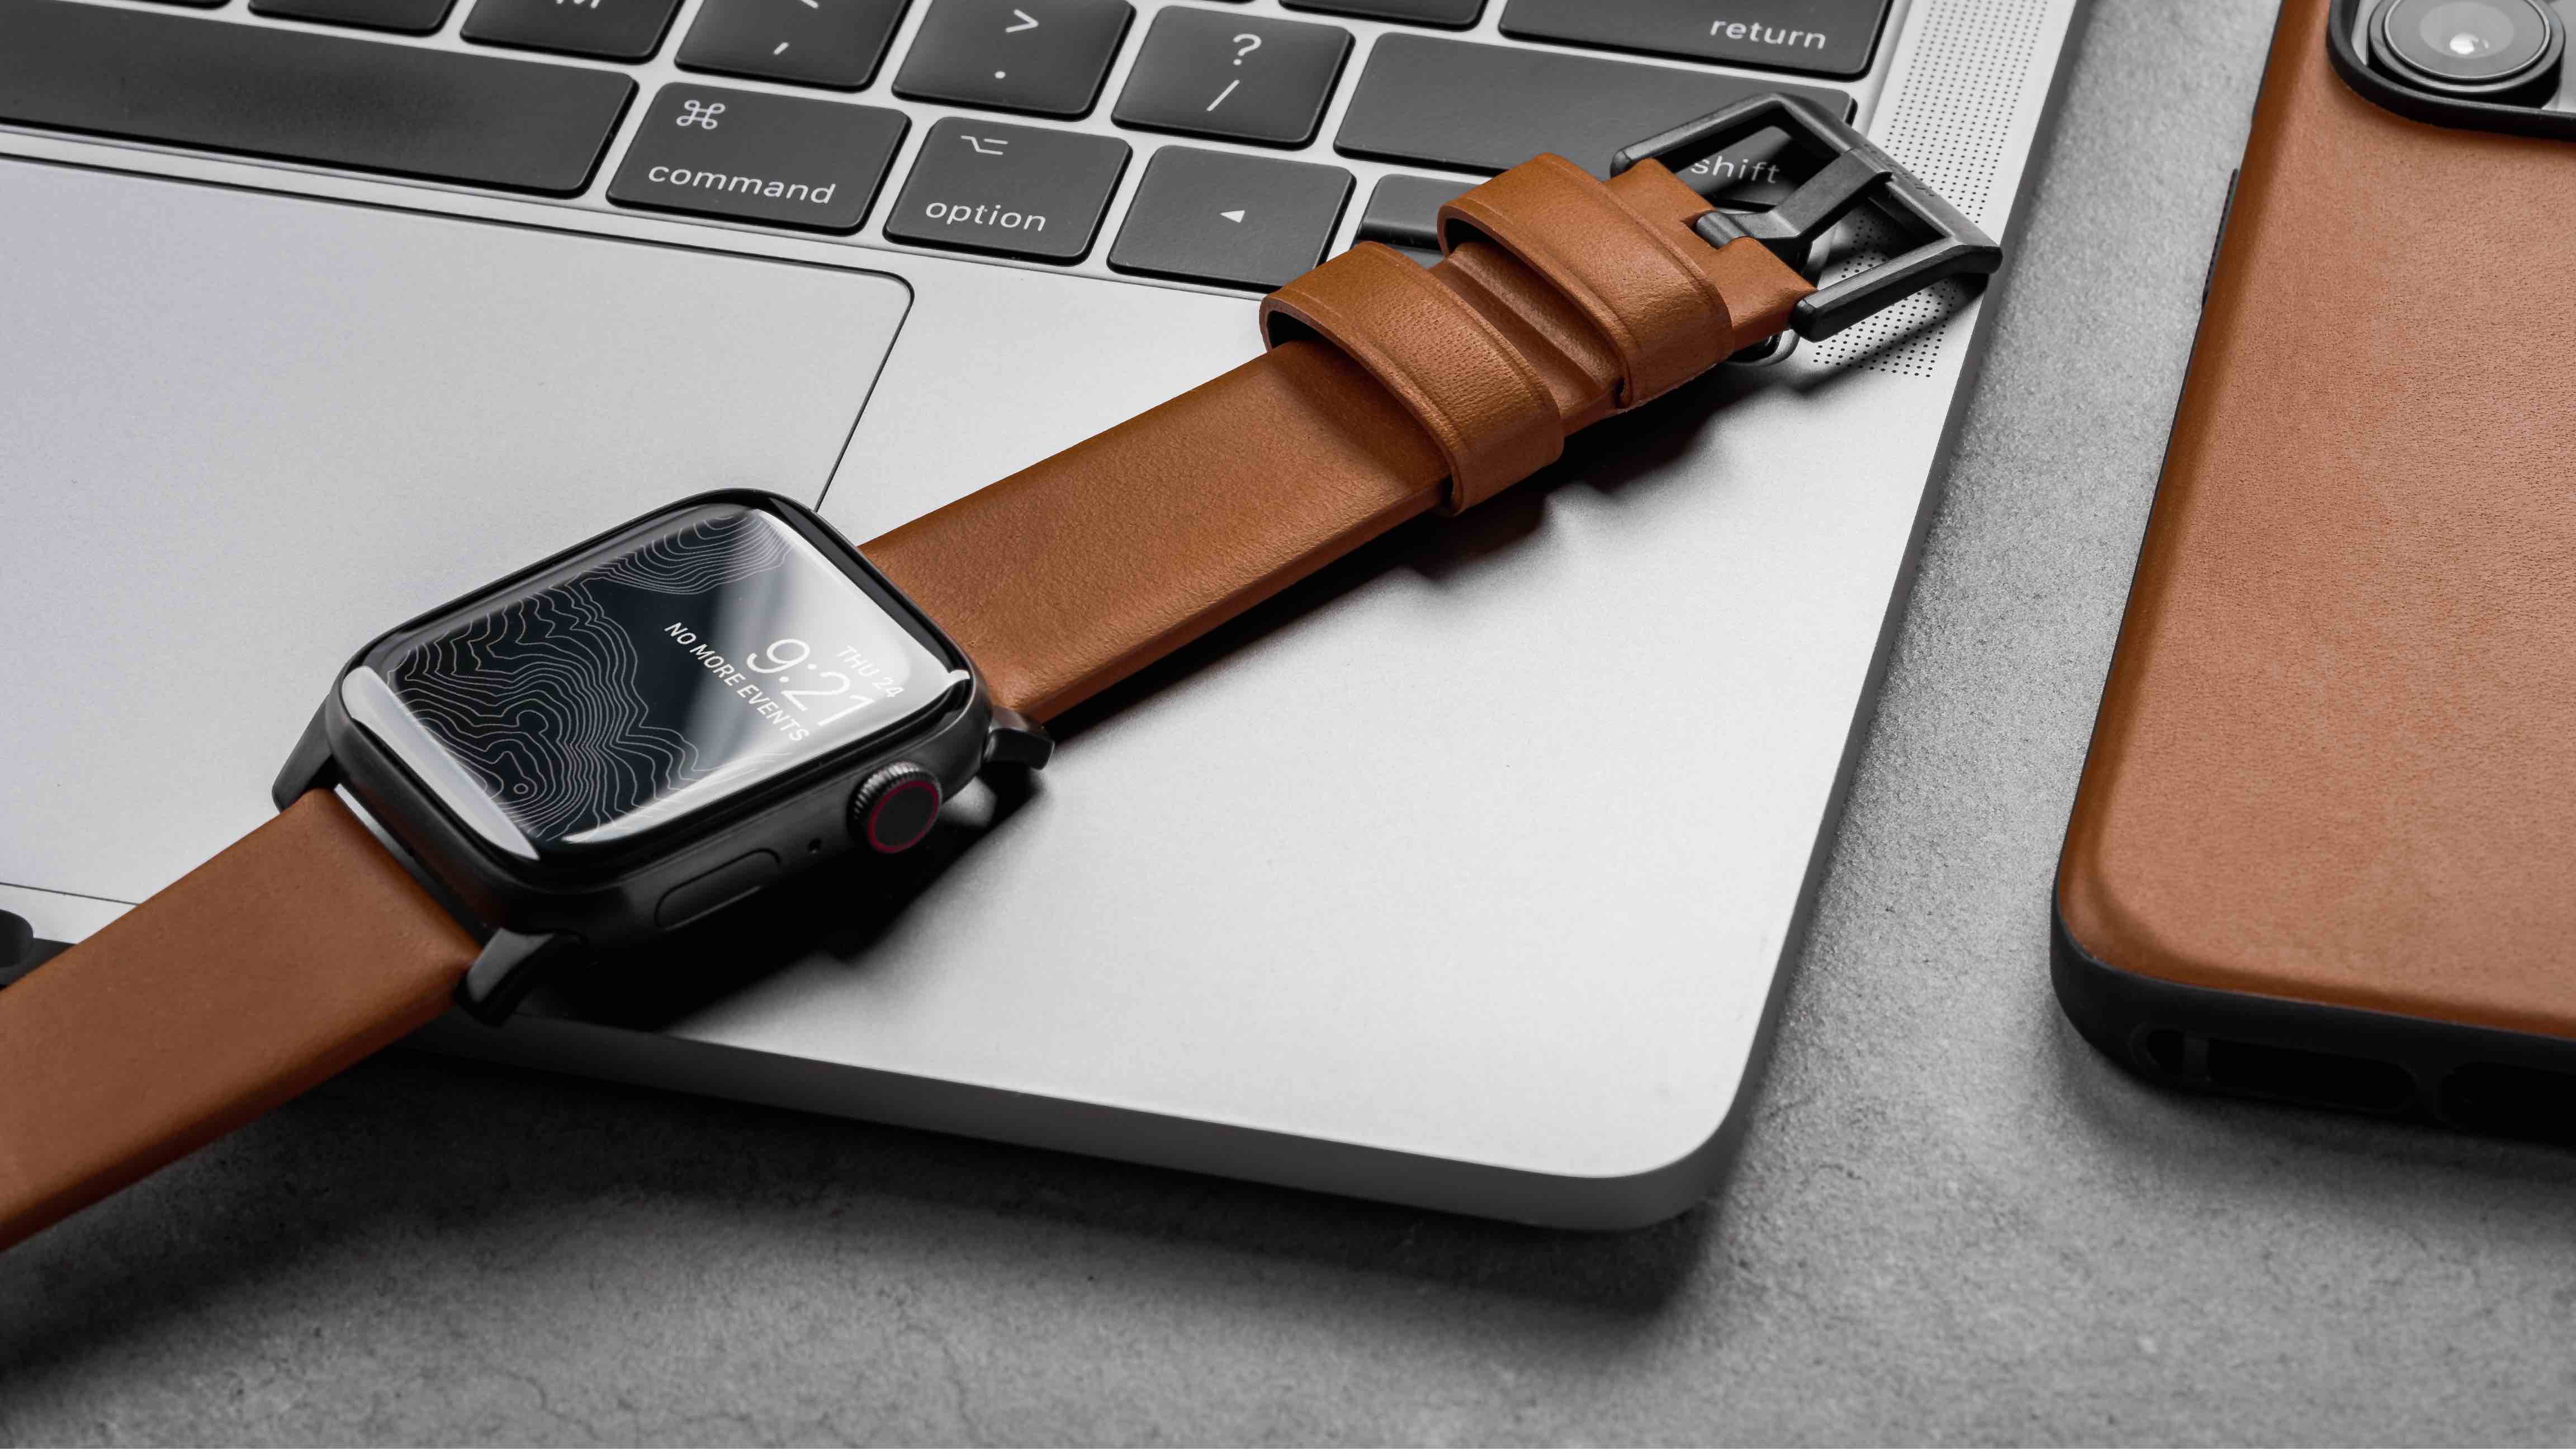 Nomad Stainless Steel Apple Watch band review - The Gadgeteer